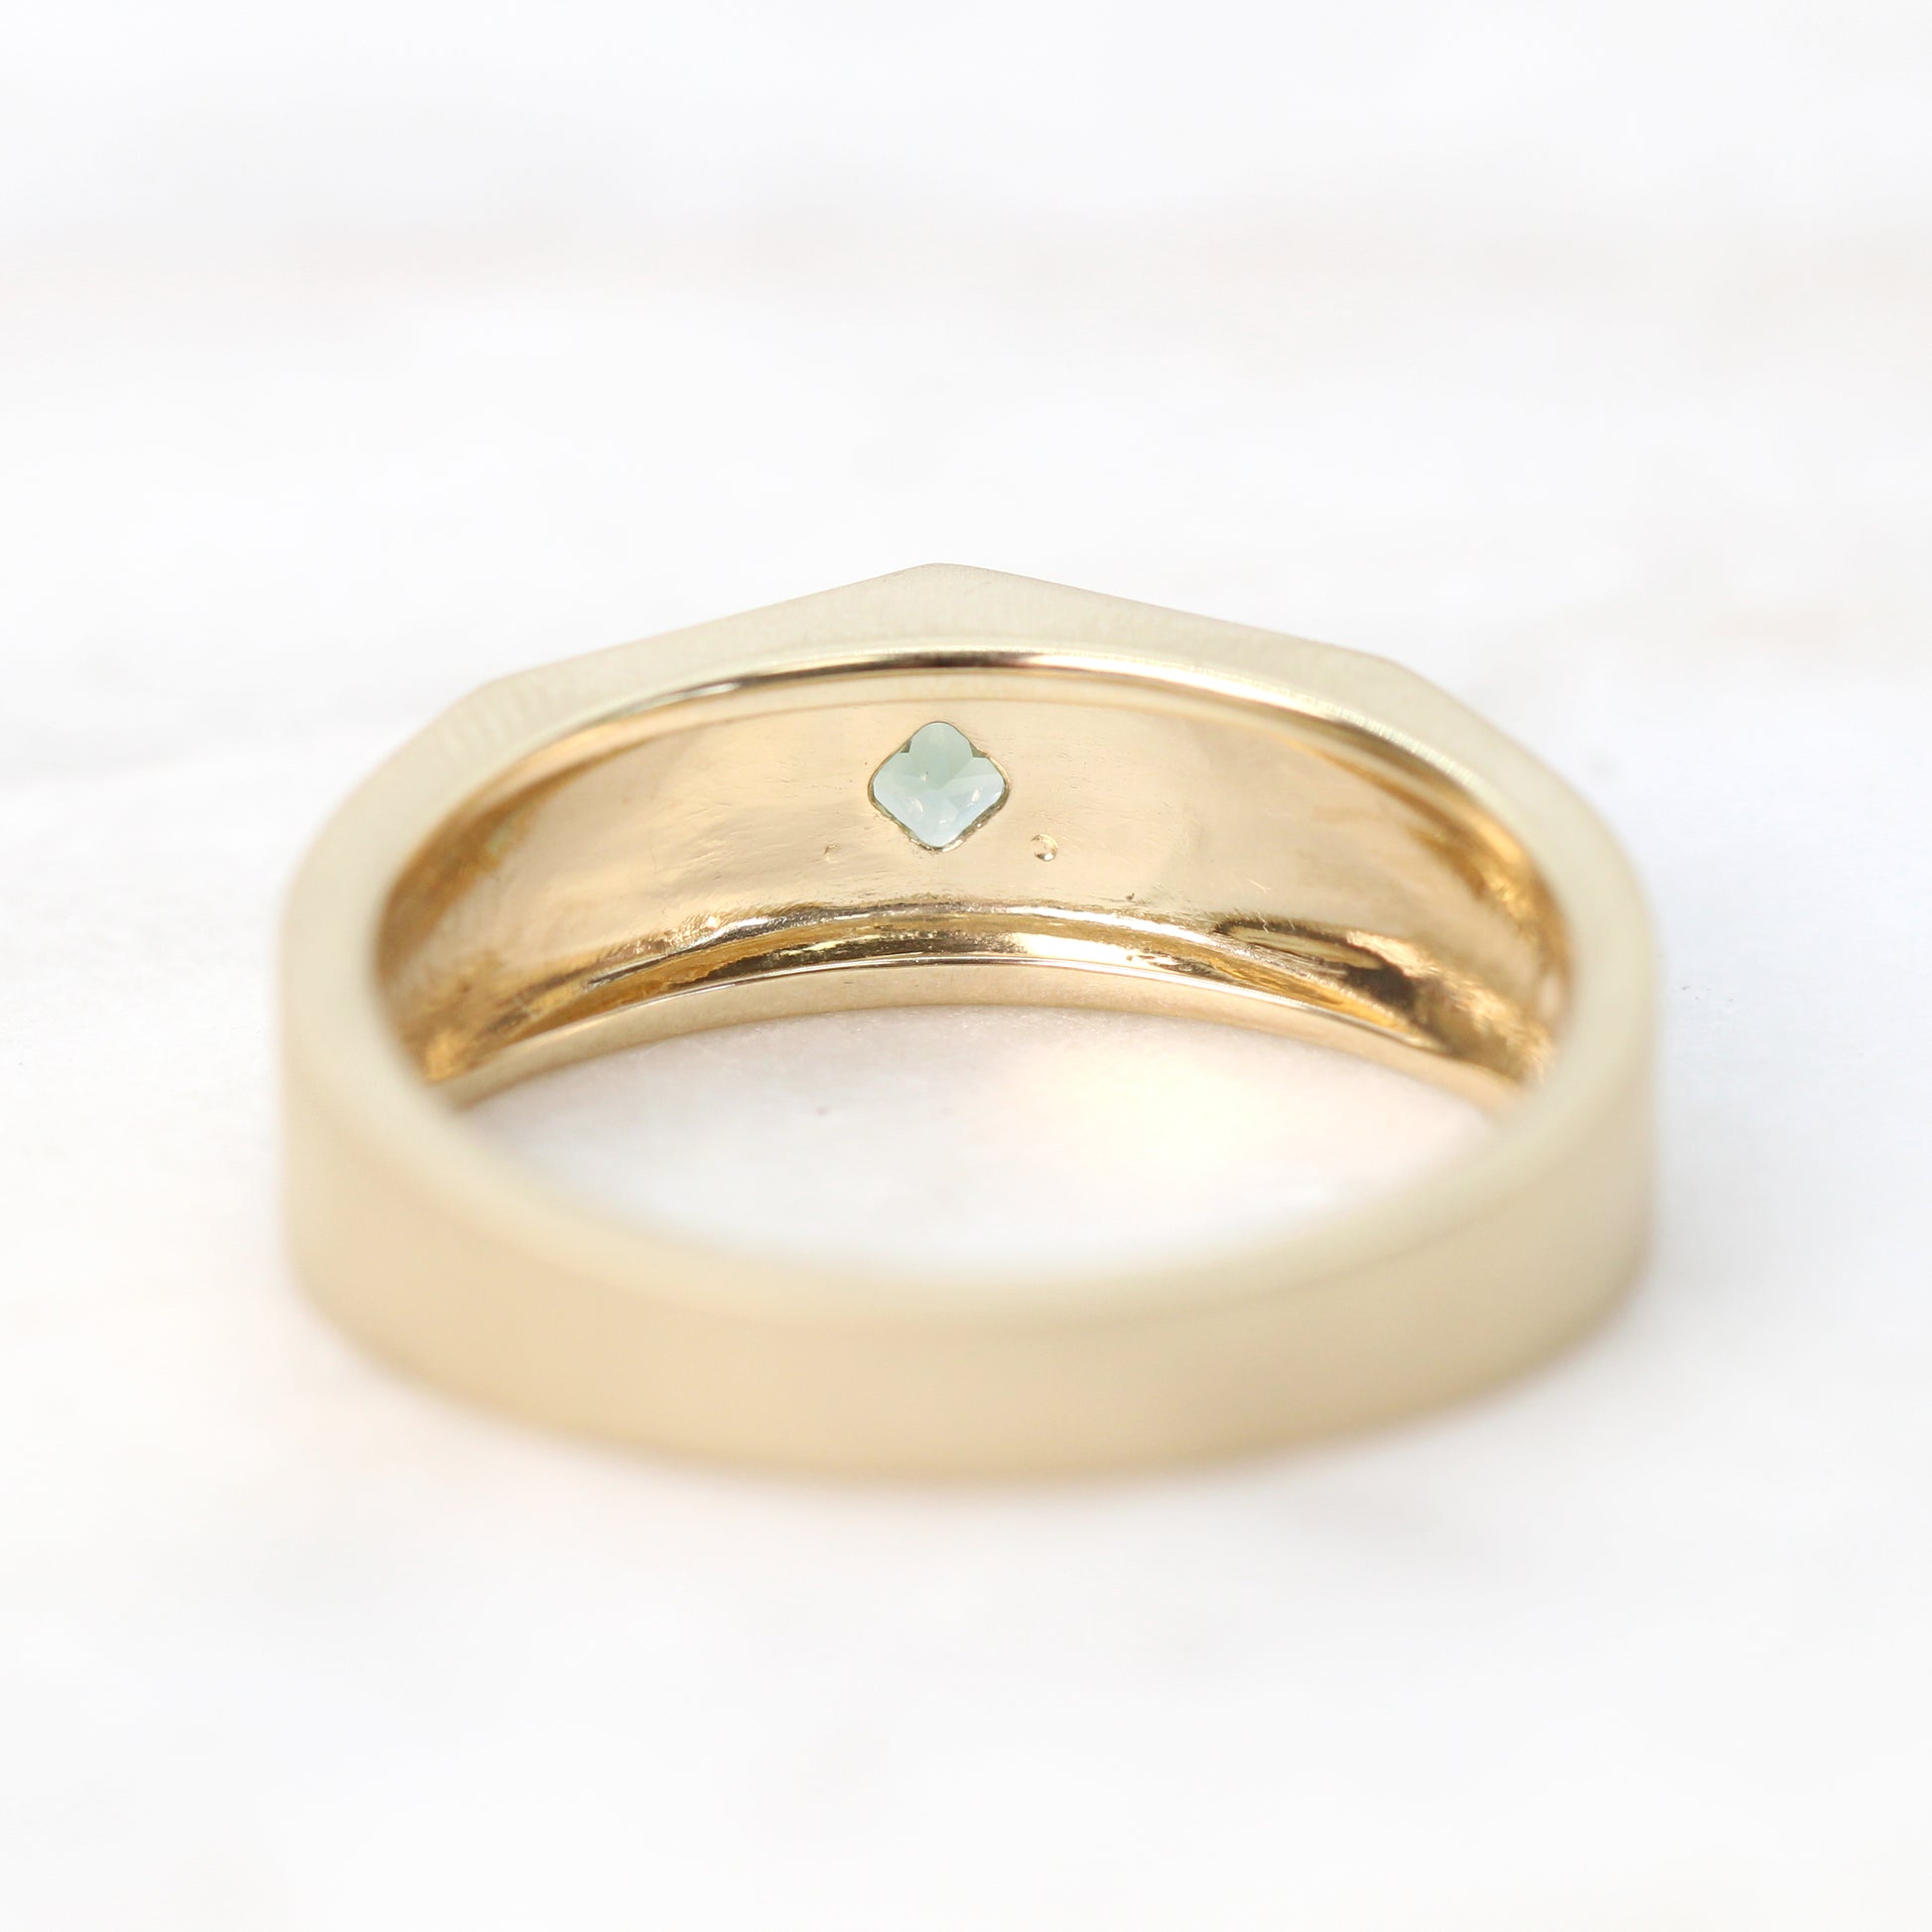 Marcus Ring - Geometric Diamond or Sapphire Unisex Wedding Band - Made to Order, Choose Your Gold Tone - Midwinter Co. Alternative Bridal Rings and Modern Fine Jewelry